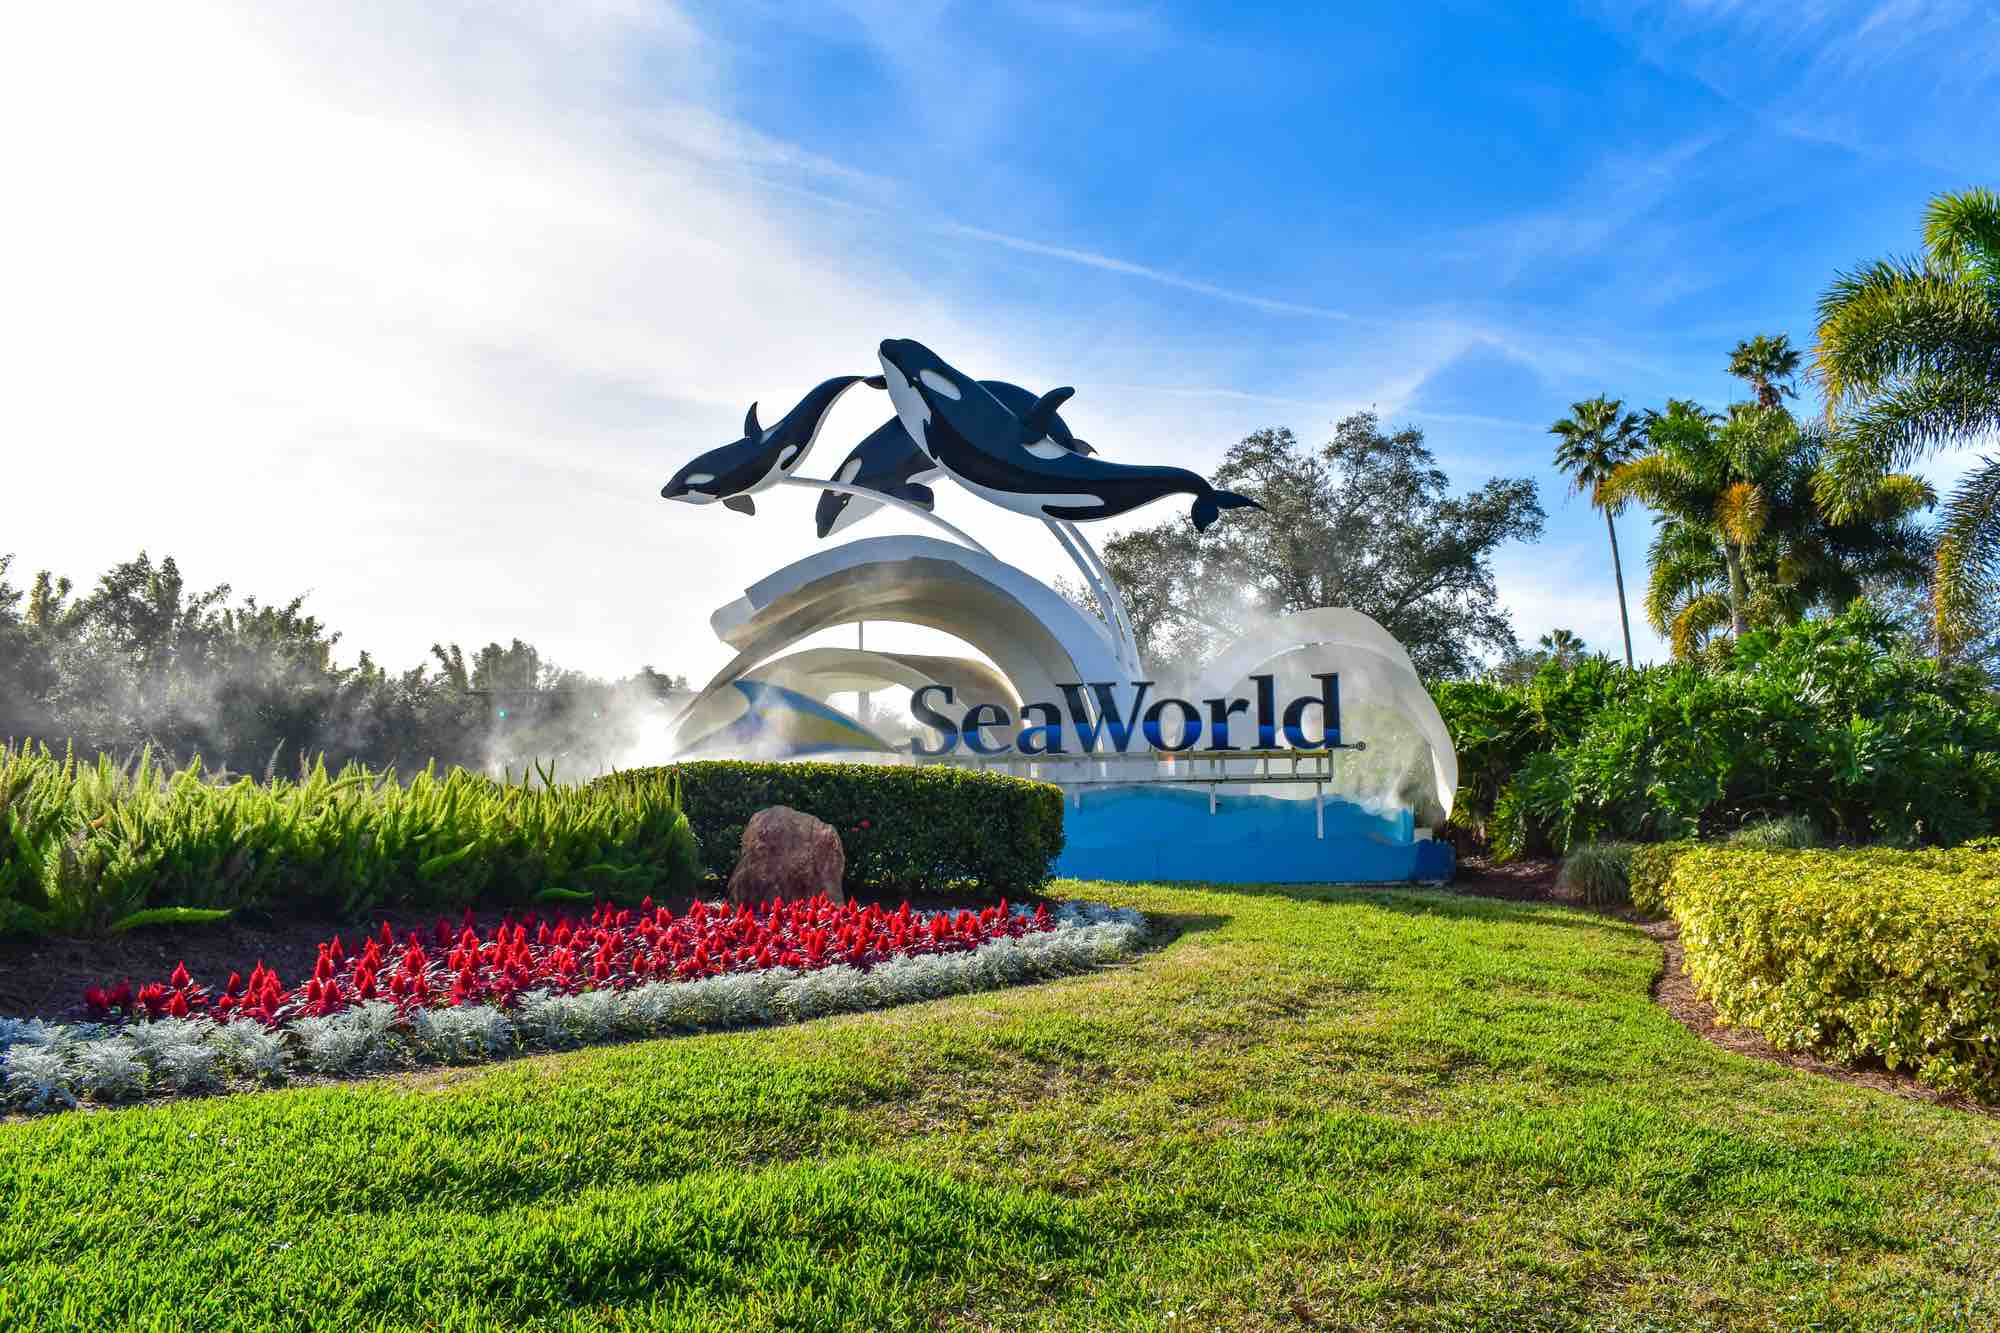 Military: Free tickets to SeaWorld available again - Orlando-News.com